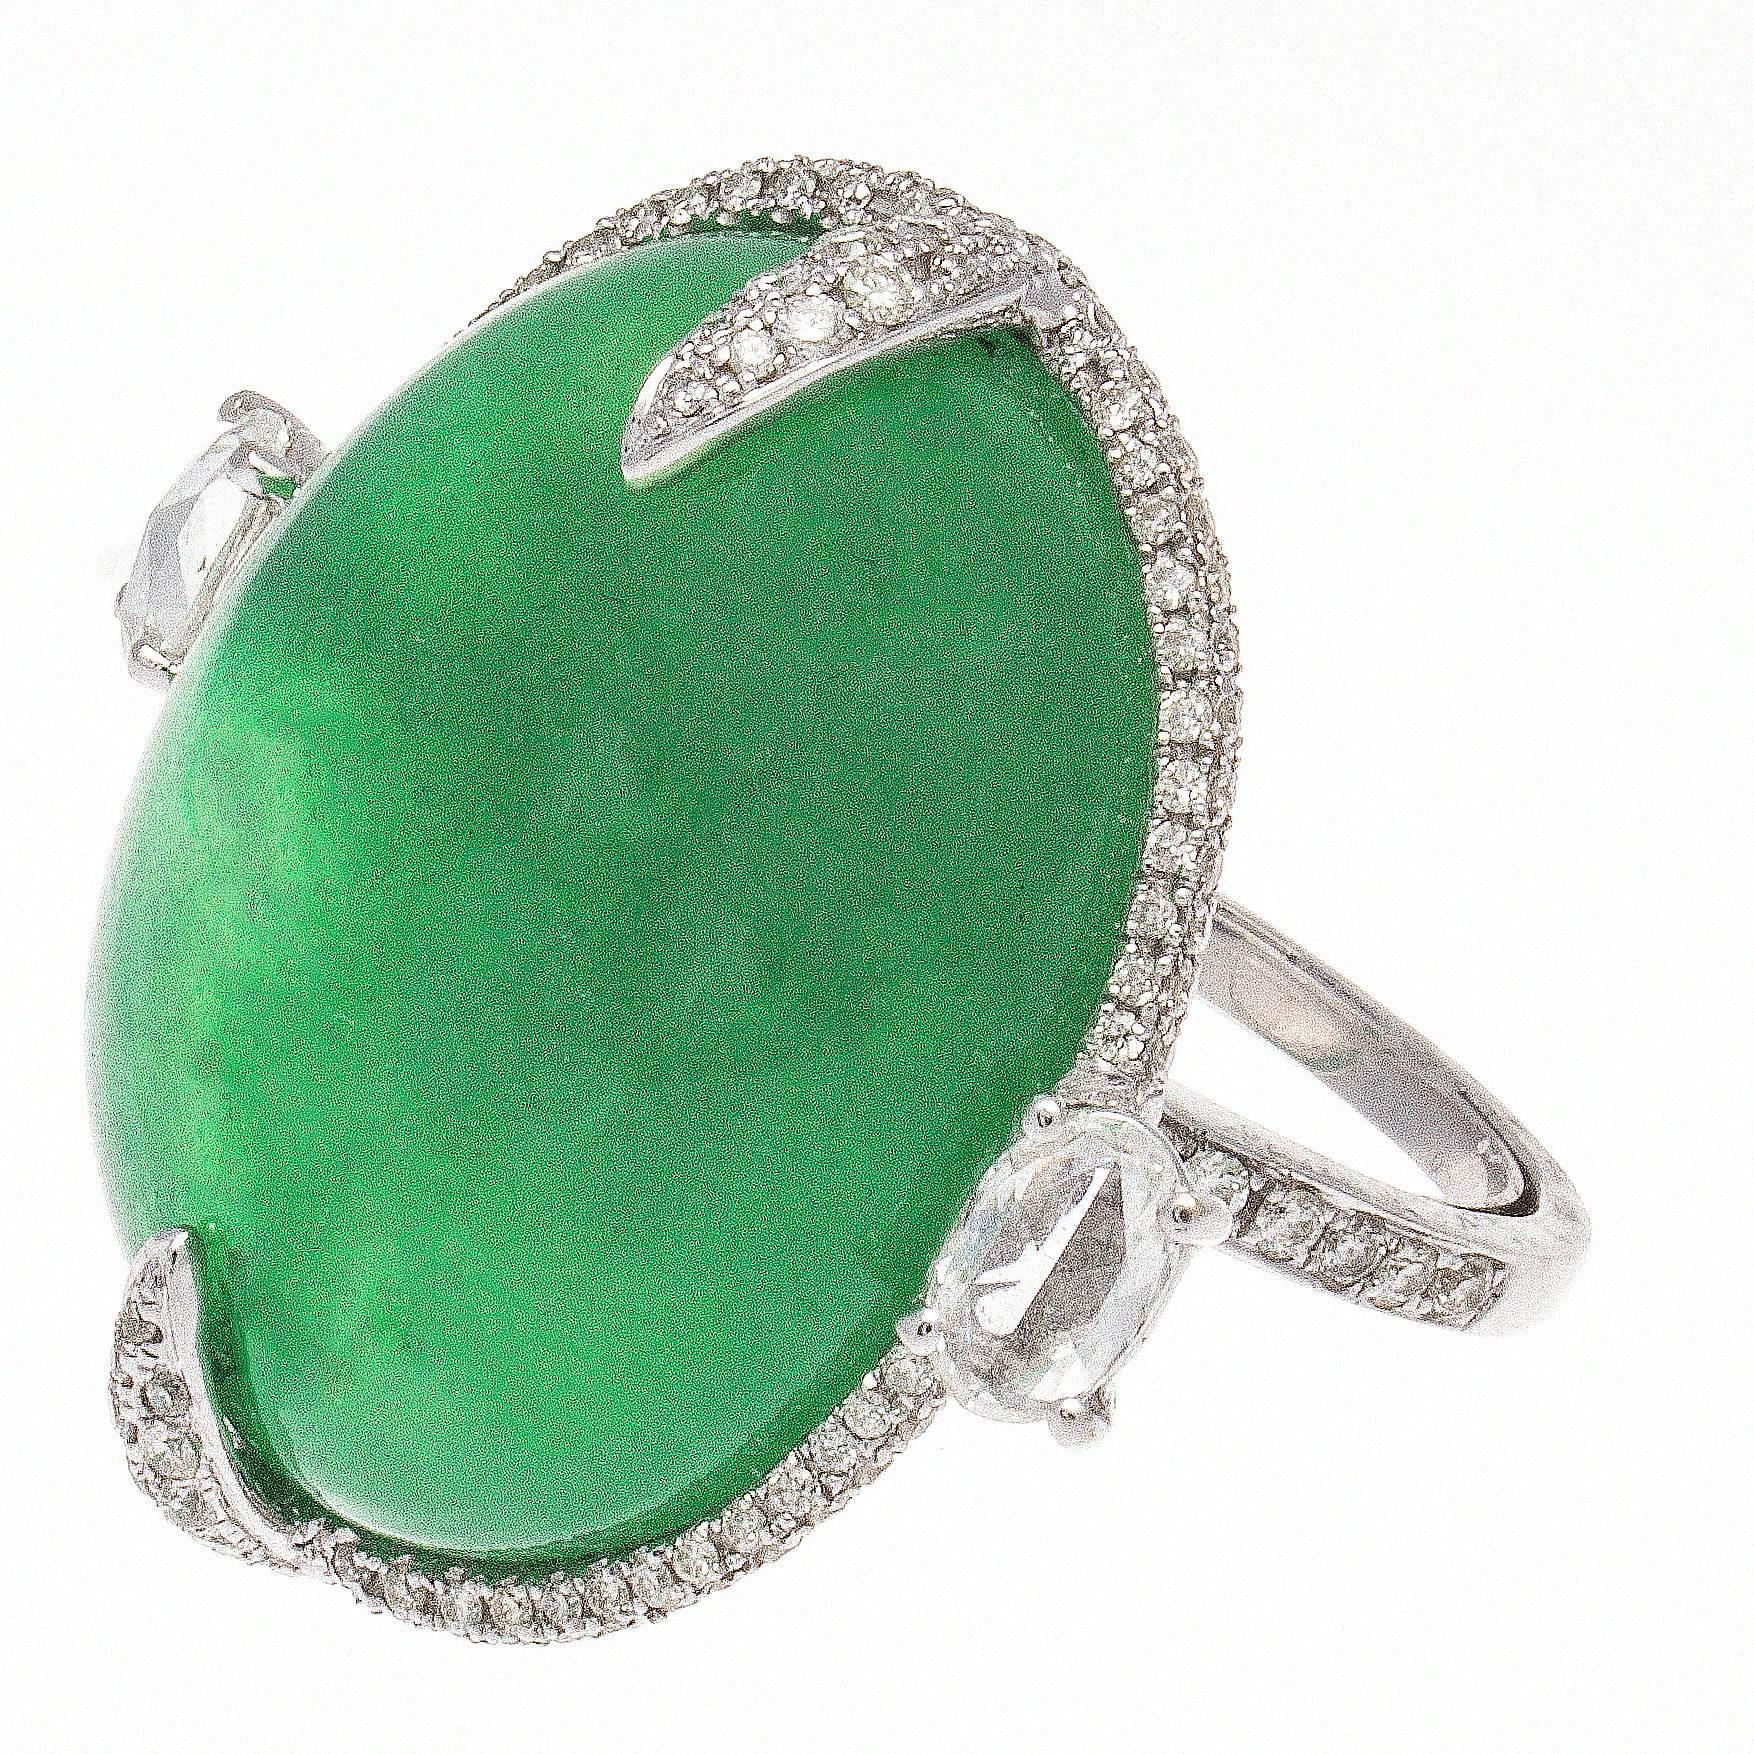 Big bold creative design, featuring a large cabochon translucent and vibrant green quartz surrounded by a halo of clean, white diamonds. Hand crafted in platinum.

Ring size 5-3/4 and may be re-sized.